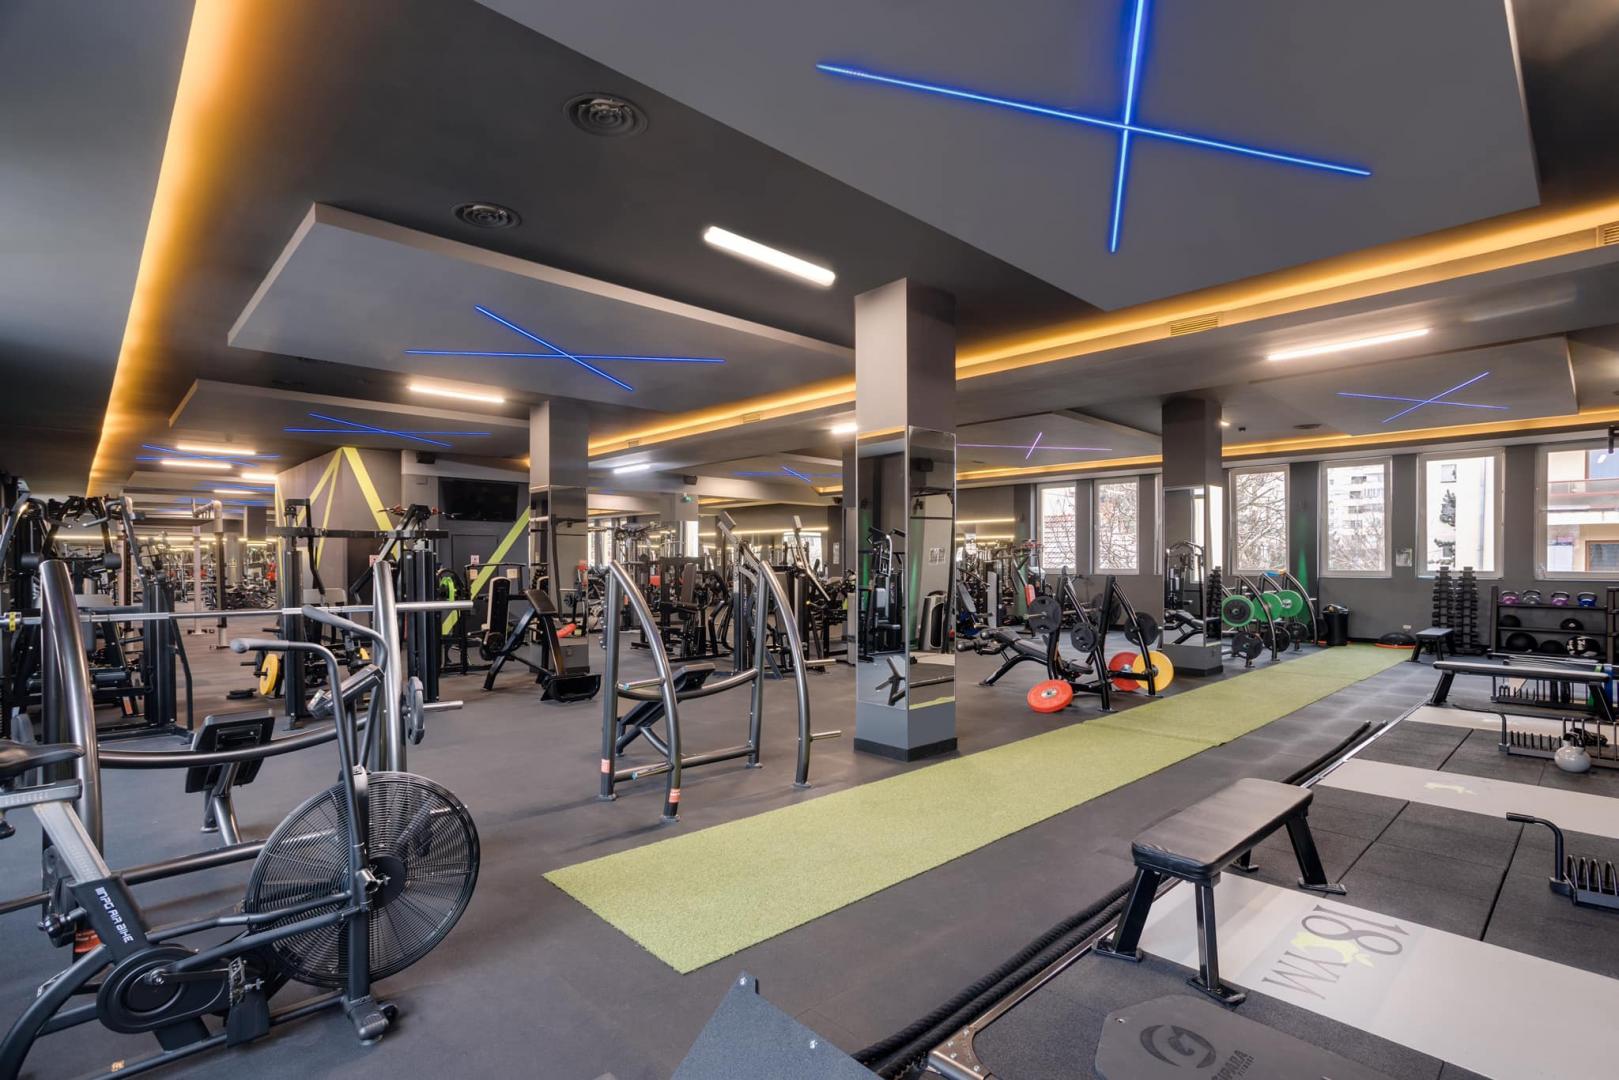 18 Gym, the gym franchise that wants to conquer Romania